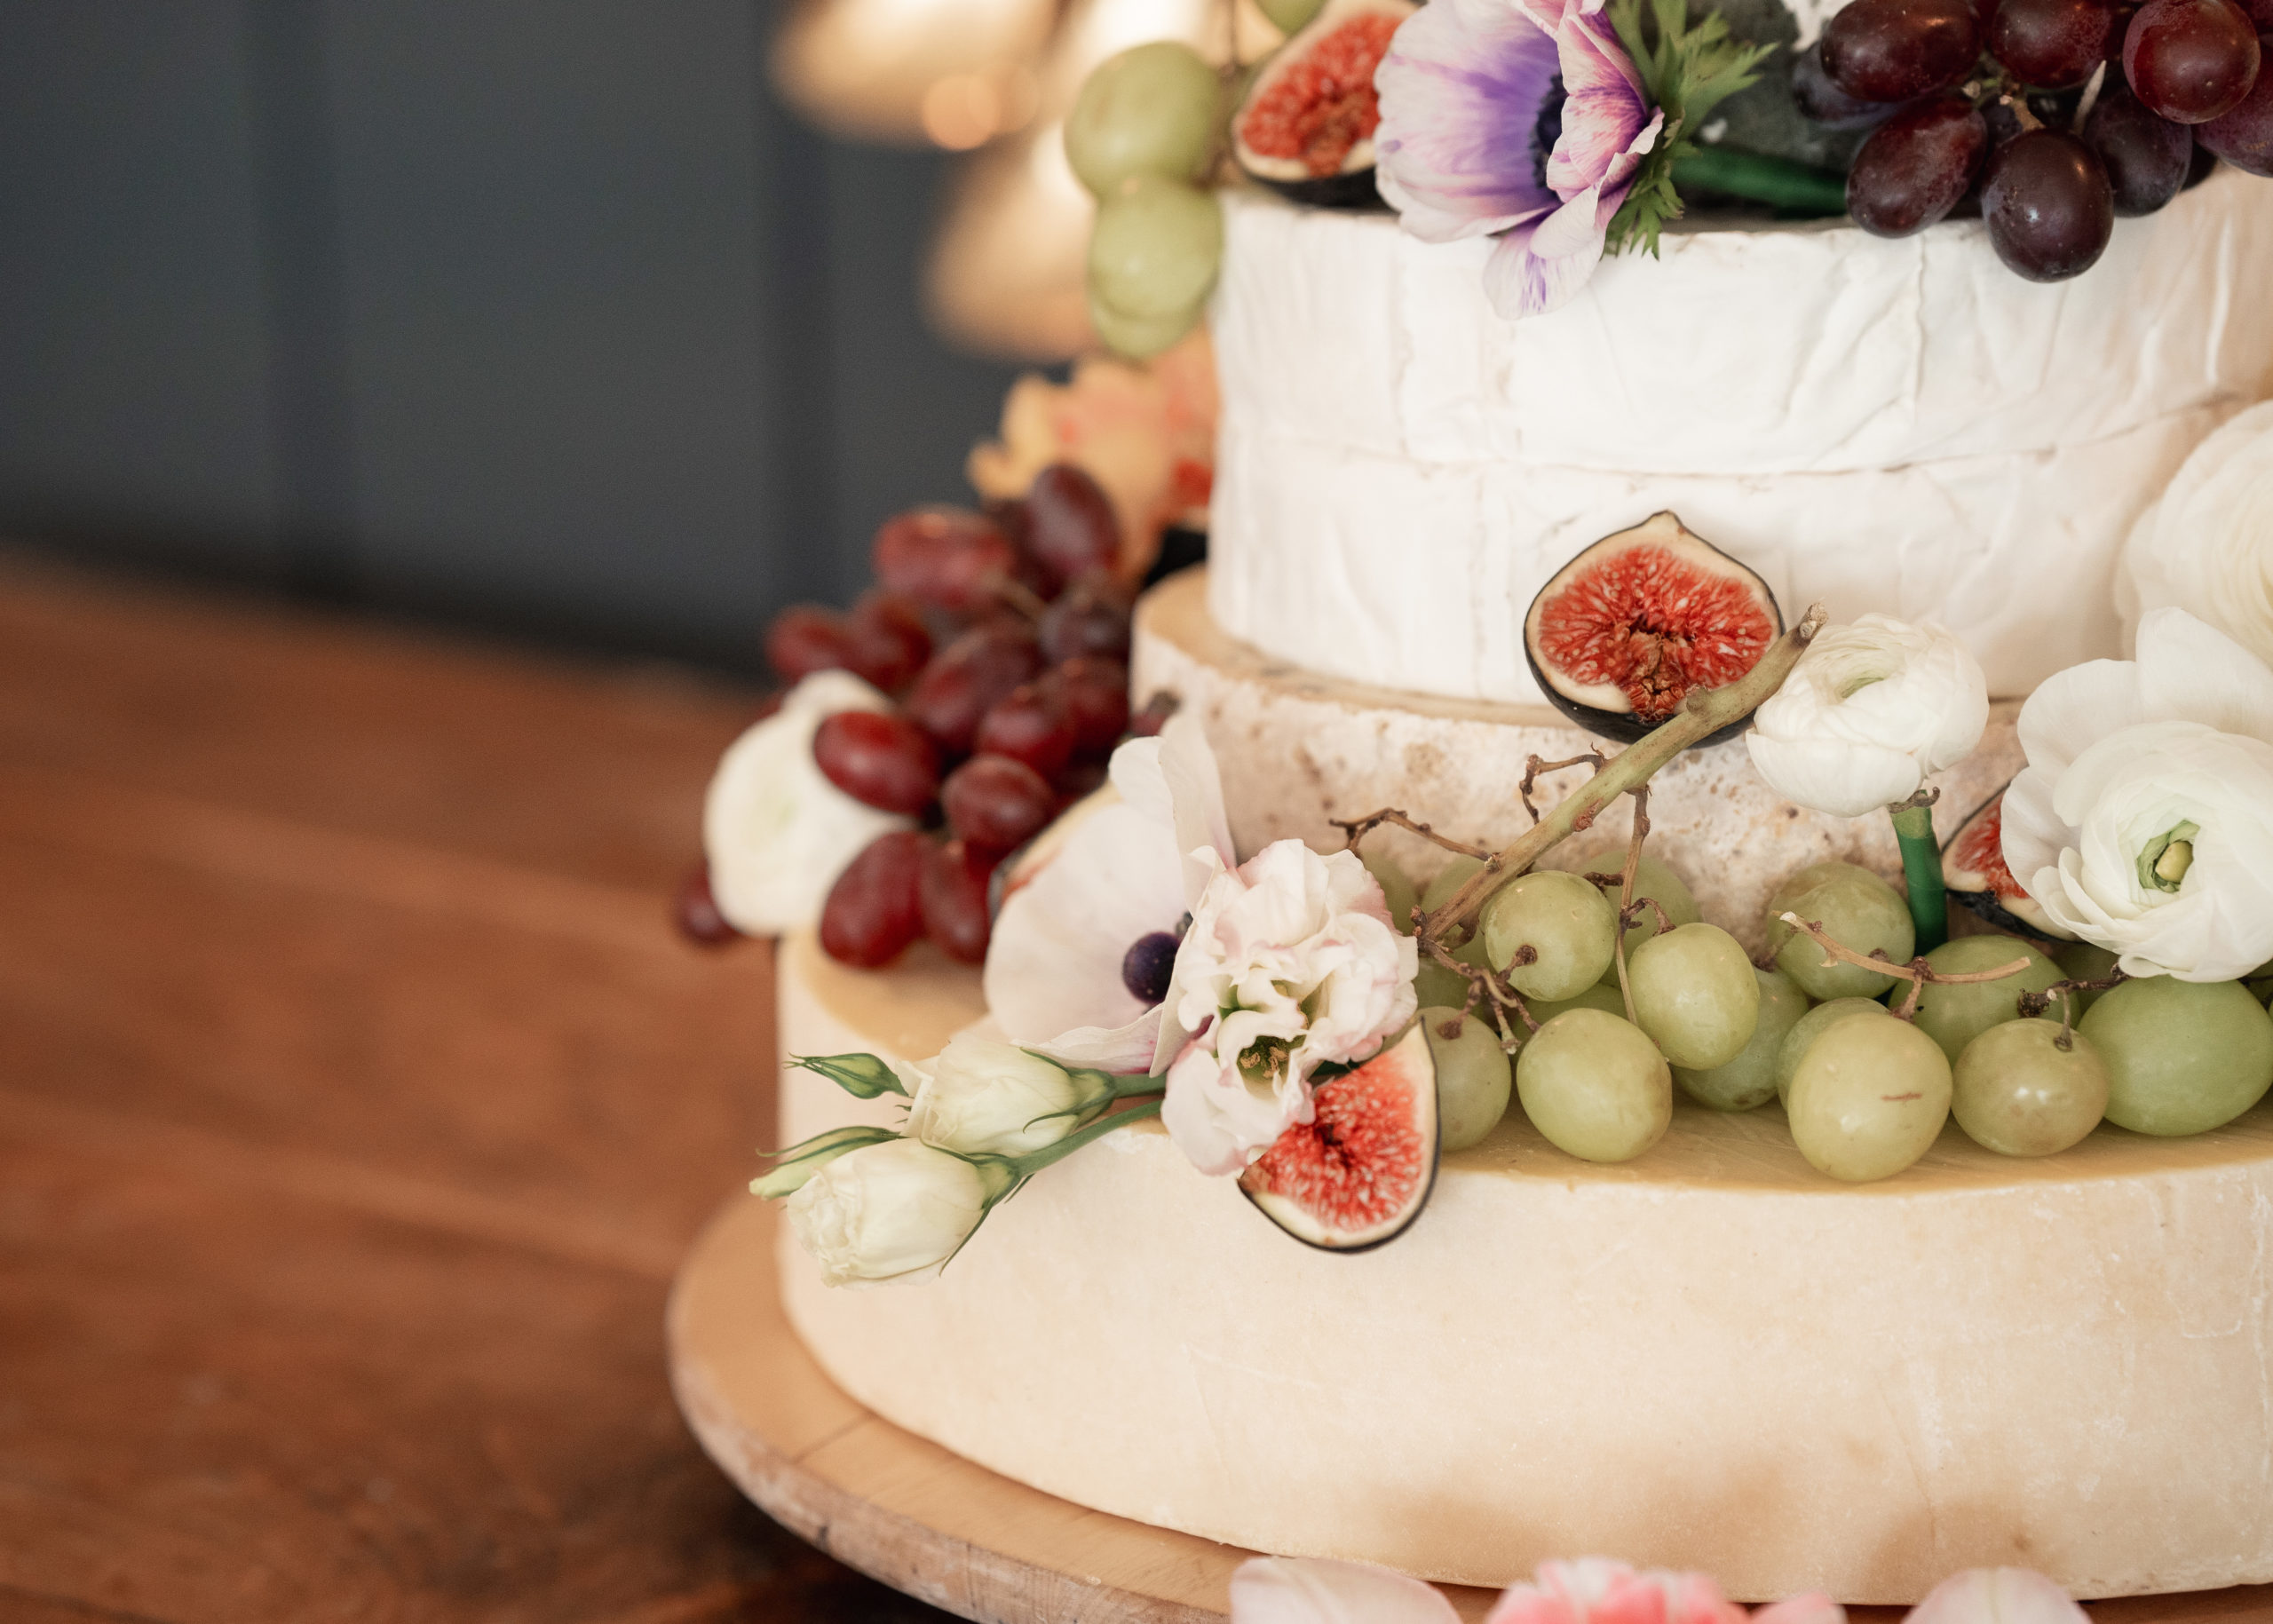 Wedding Cake with grapes and figs